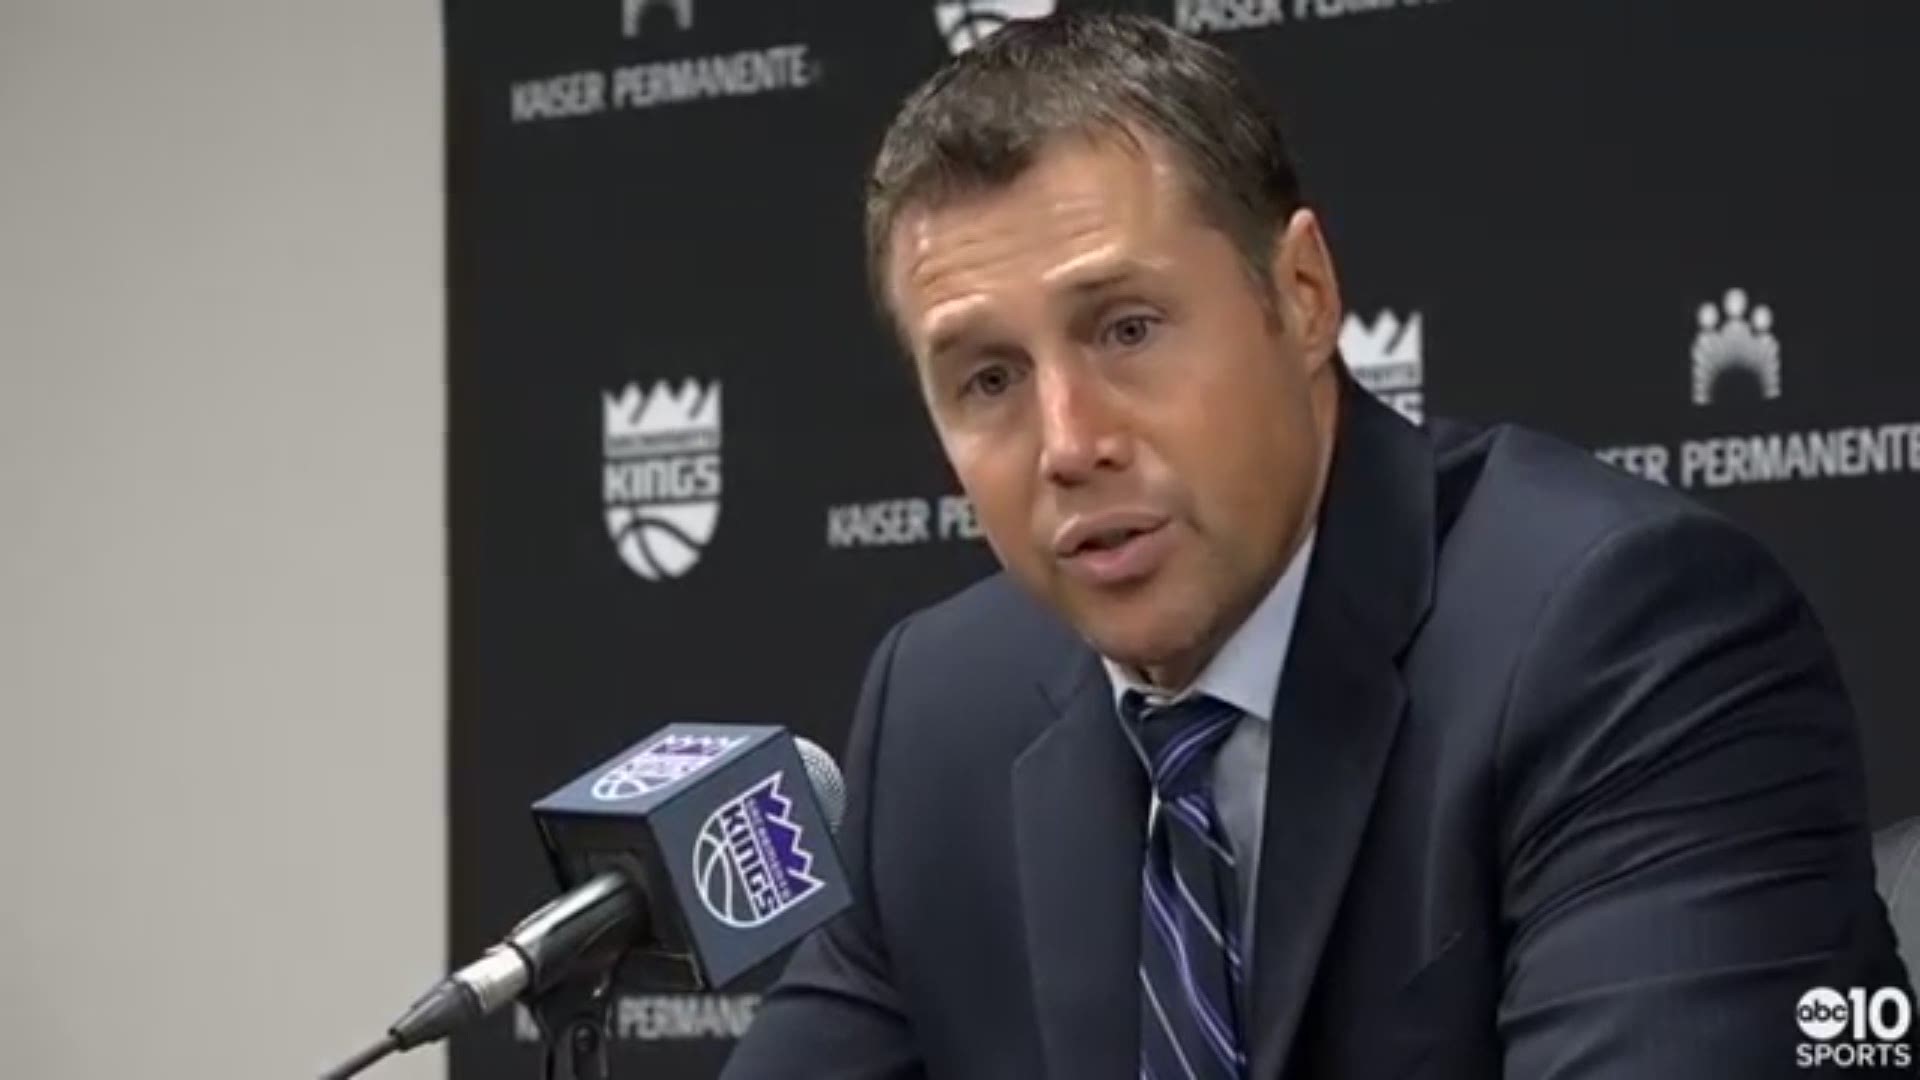 Kings head coach Dave Joerger talks about Wednesday's loss in overtime to the Milwaukee Bucks, losing rookie Marvin Bagley III to a left knee injury, the resiliency of his team to battle with the NBA's top teams during the last two weeks and the play from Harry Giles in the second half of the game.